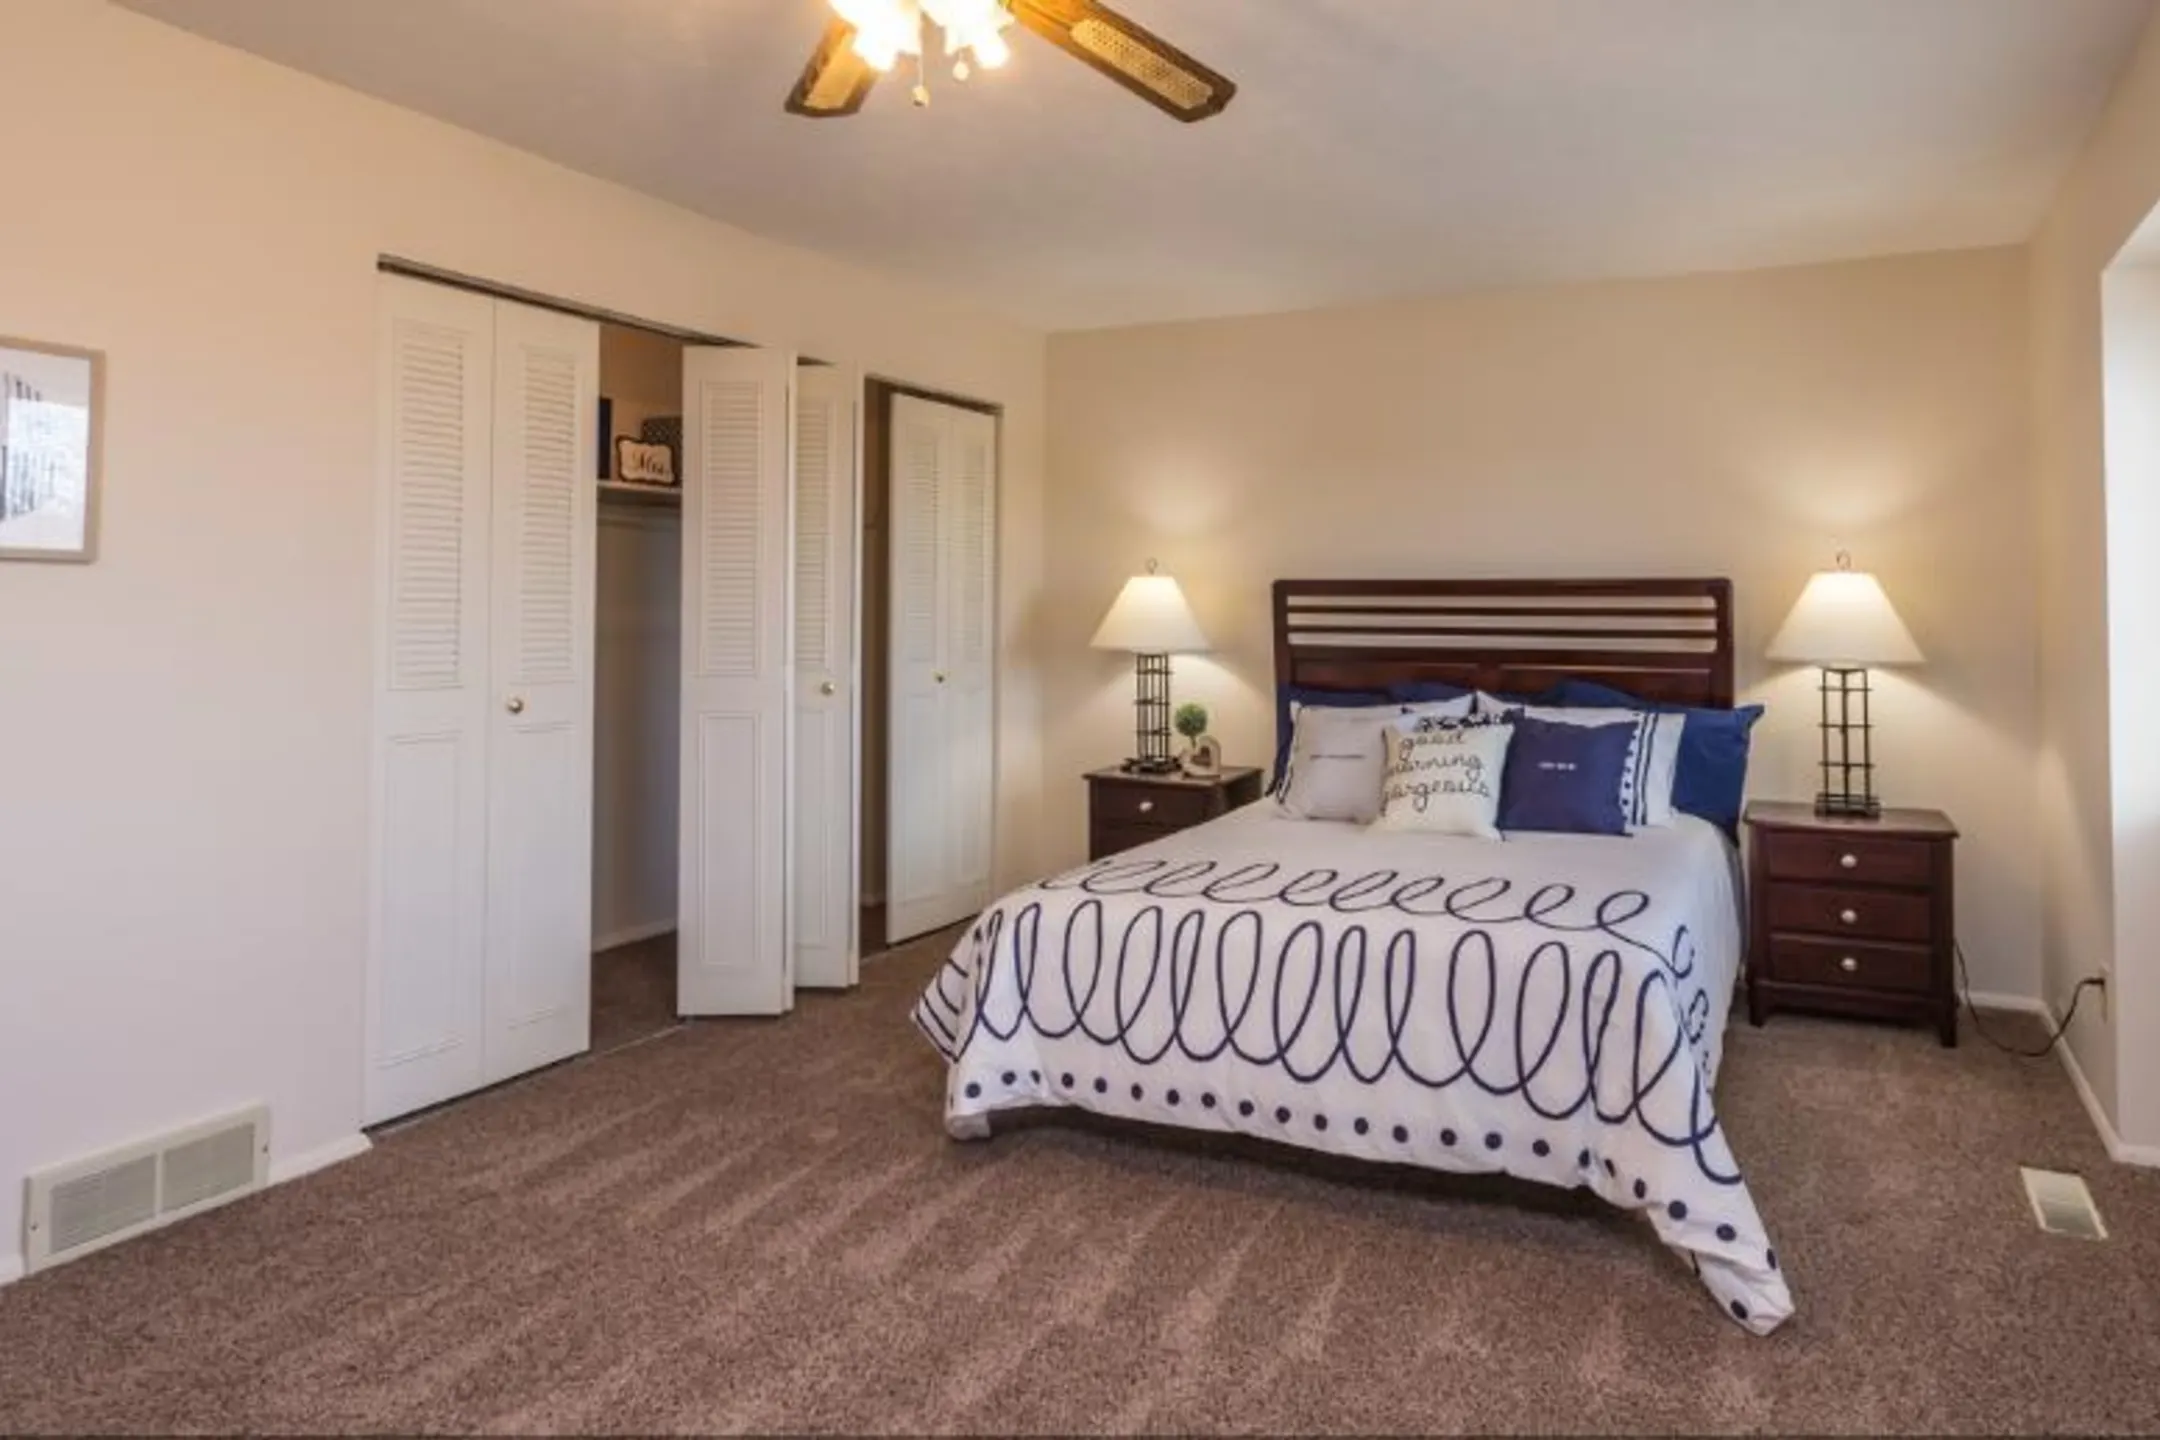 Bedroom - Little Acres Townhomes & Apartments - Hermitage, PA